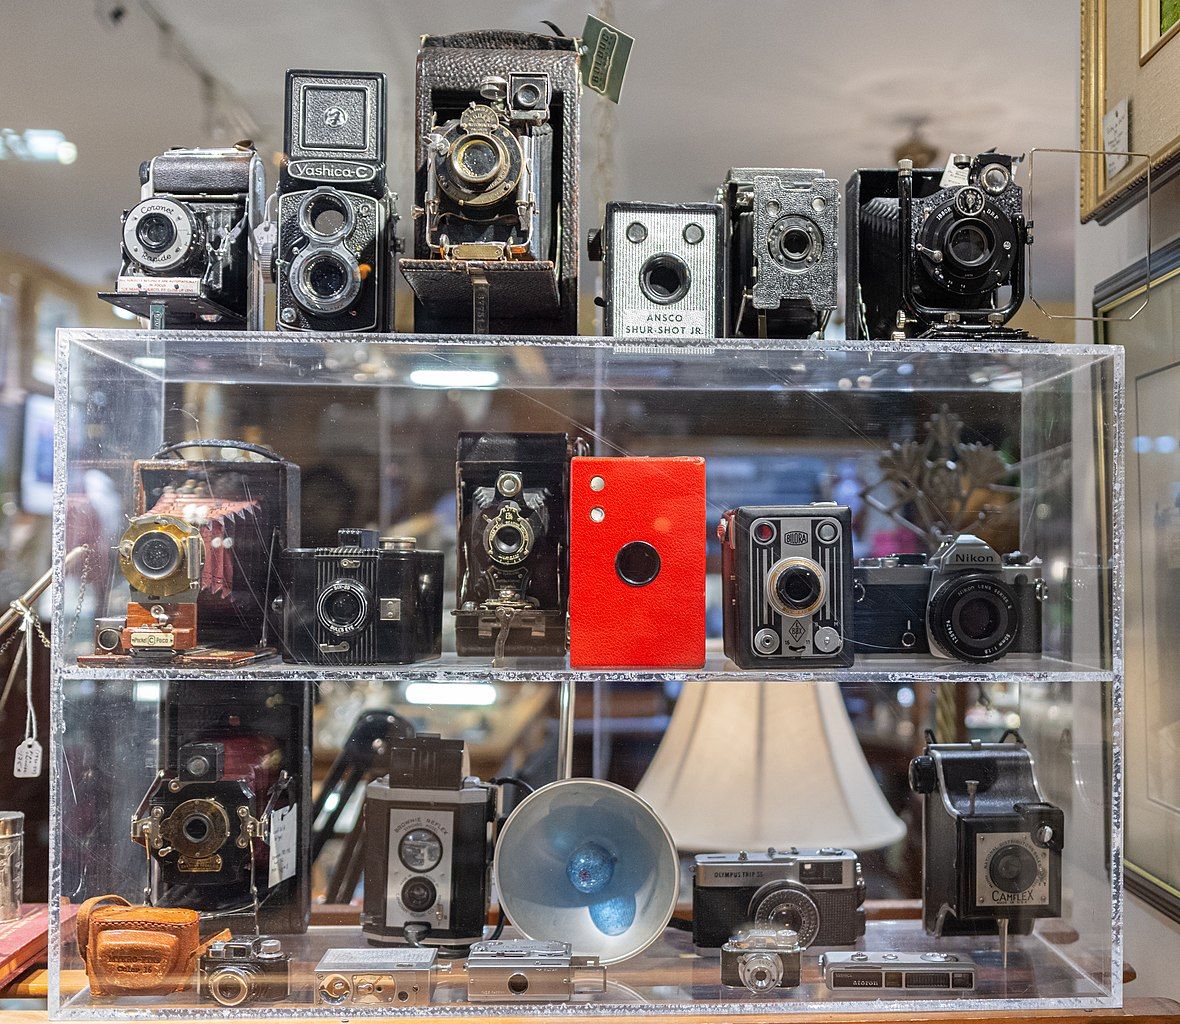 A dozen or so large film cameras on shelves in a glass case.